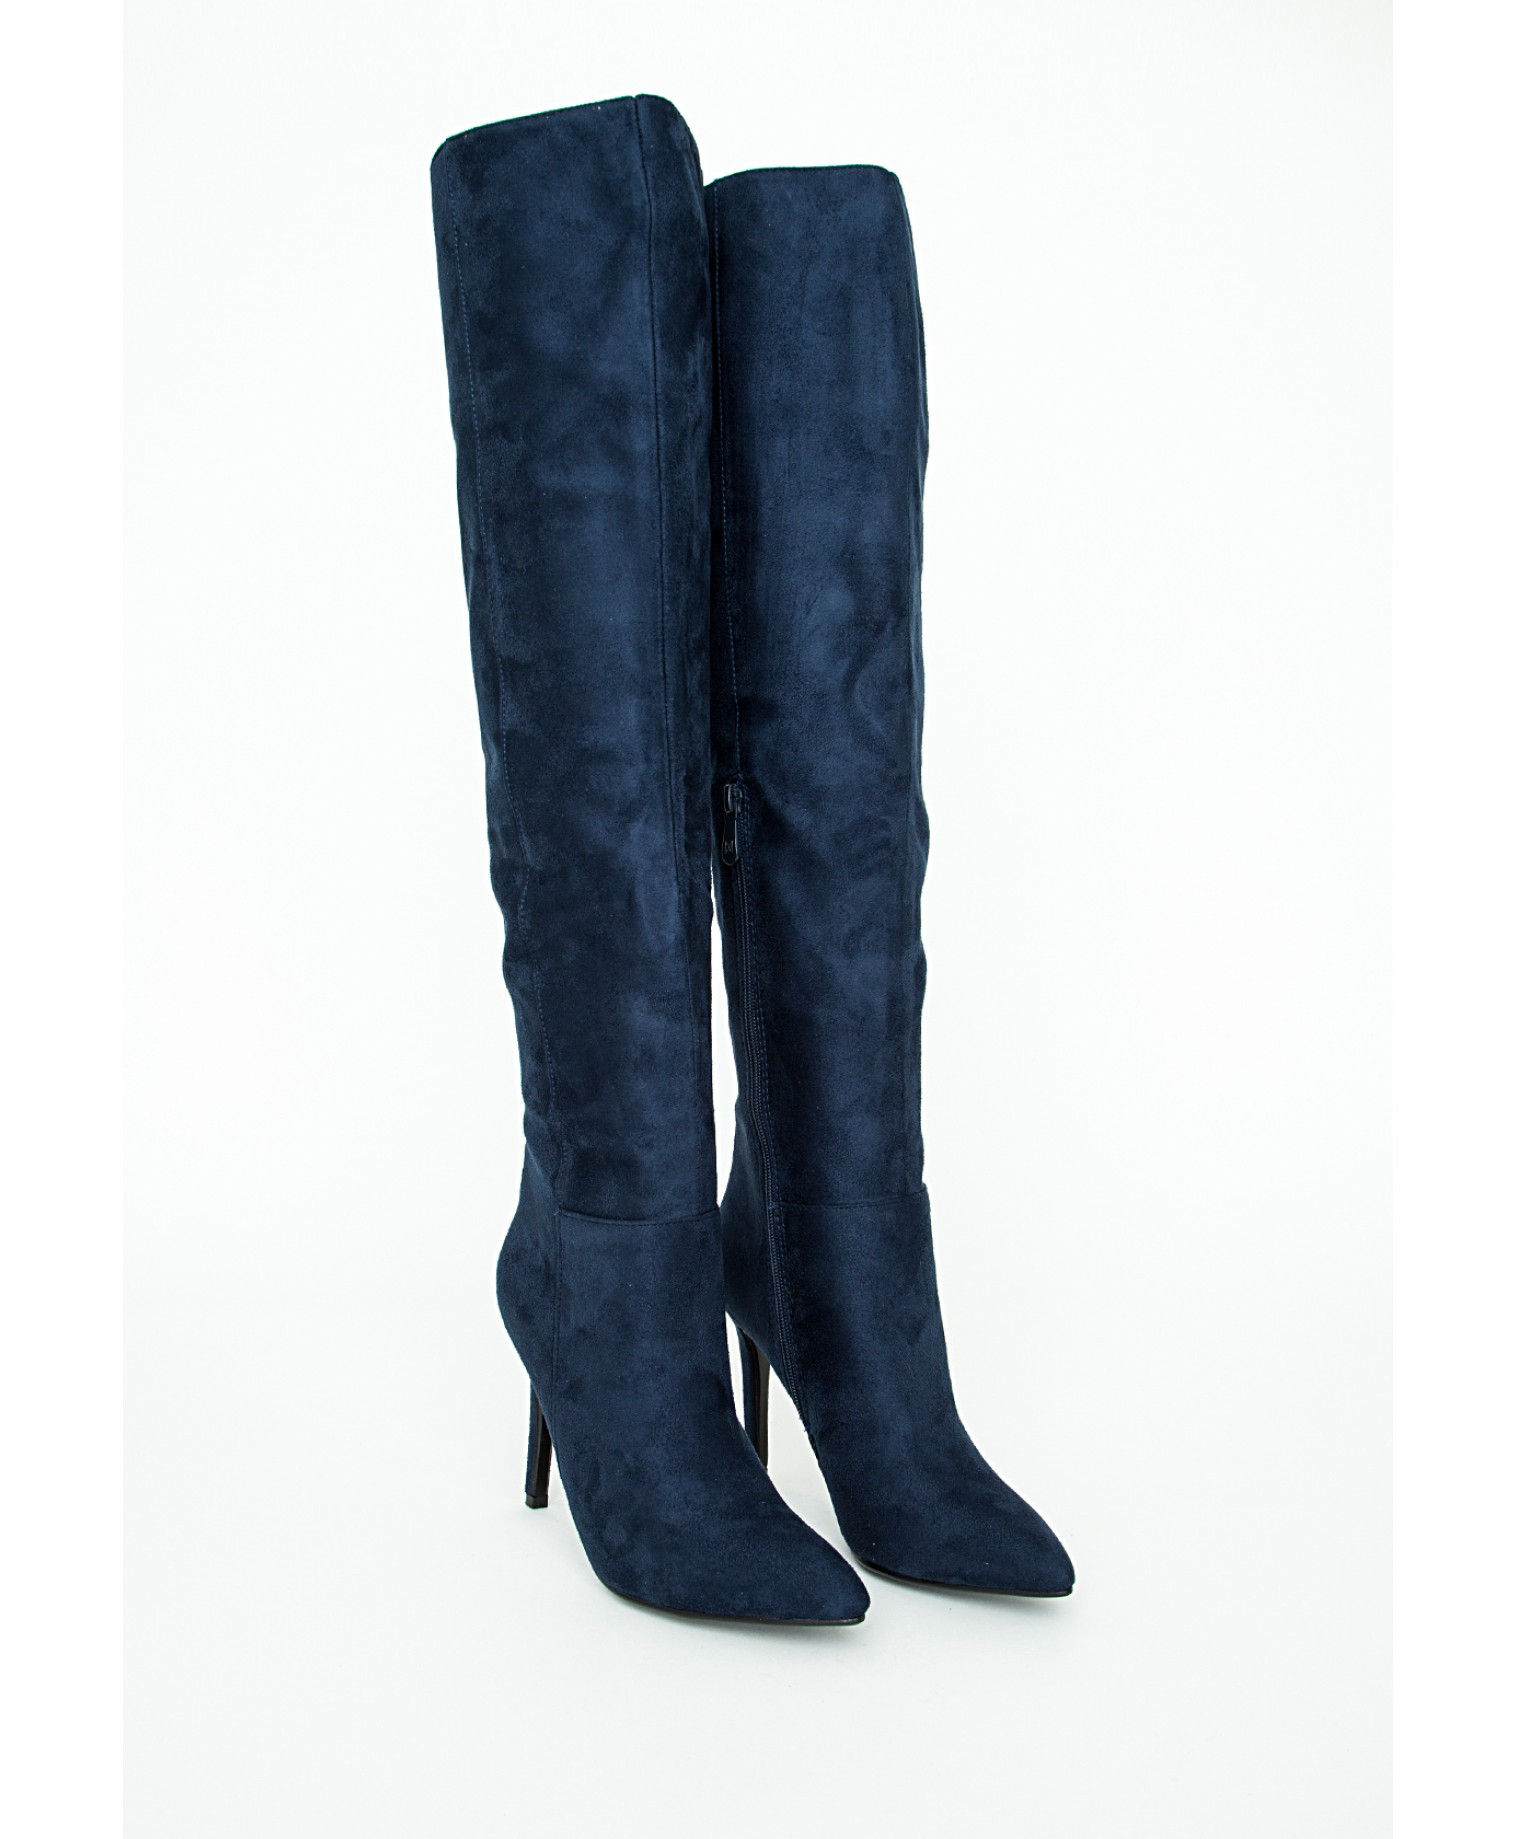 Lyst - Missguided Knee High Stiletto Heeled Boots Navy in Blue